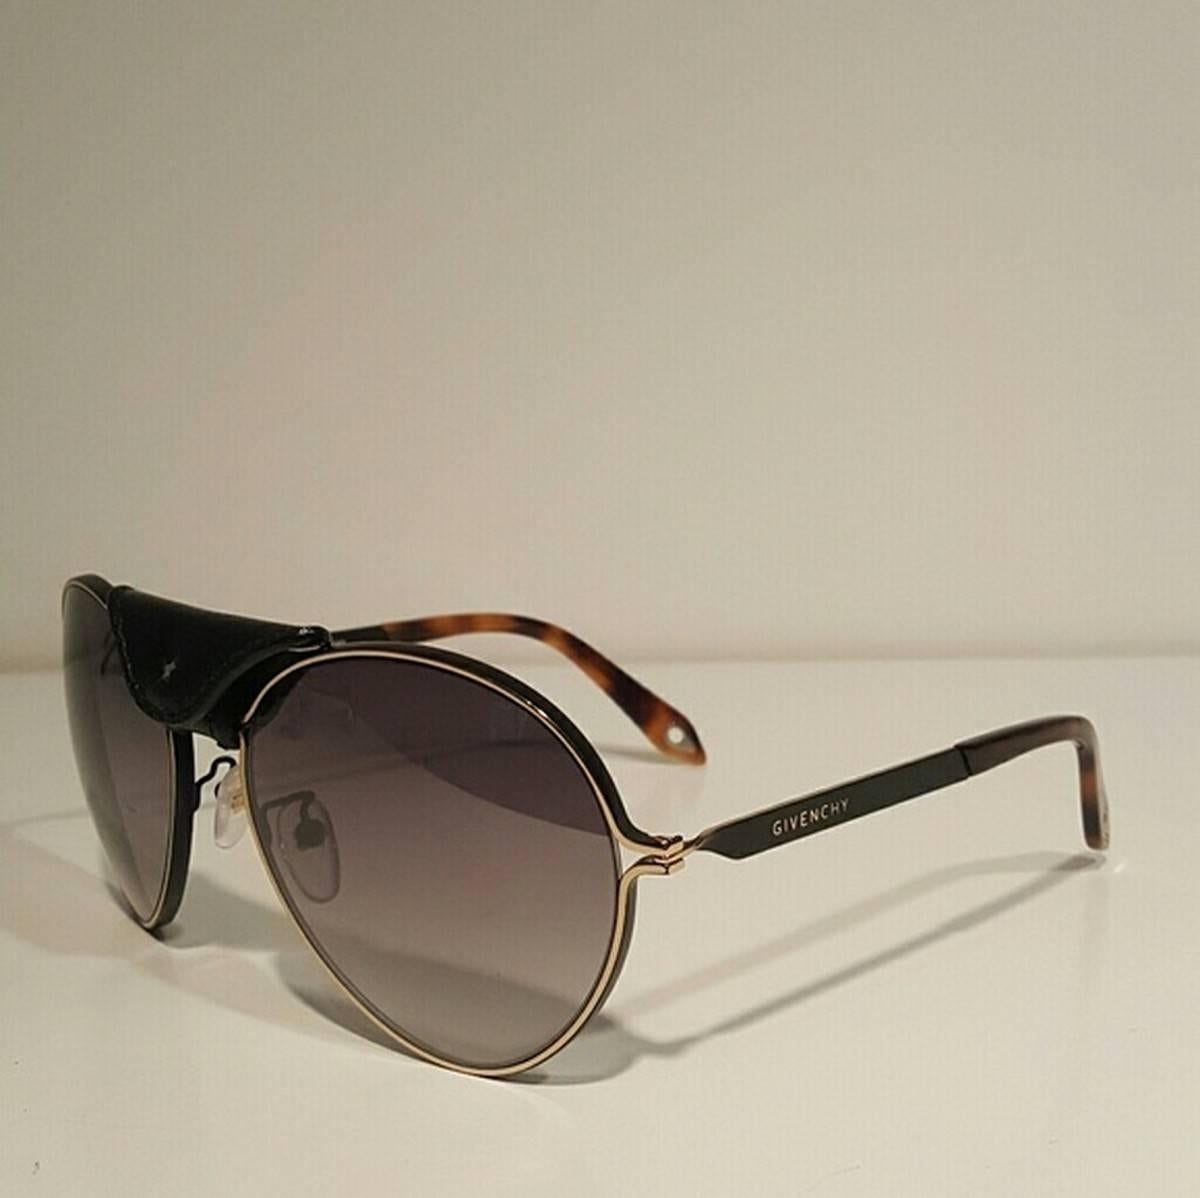 Givenchy Gold Aviator Sunglasses
Color: Gold
Size: OS

Brand new with box.
Unused condition.
No flaws.
Made in Italy.